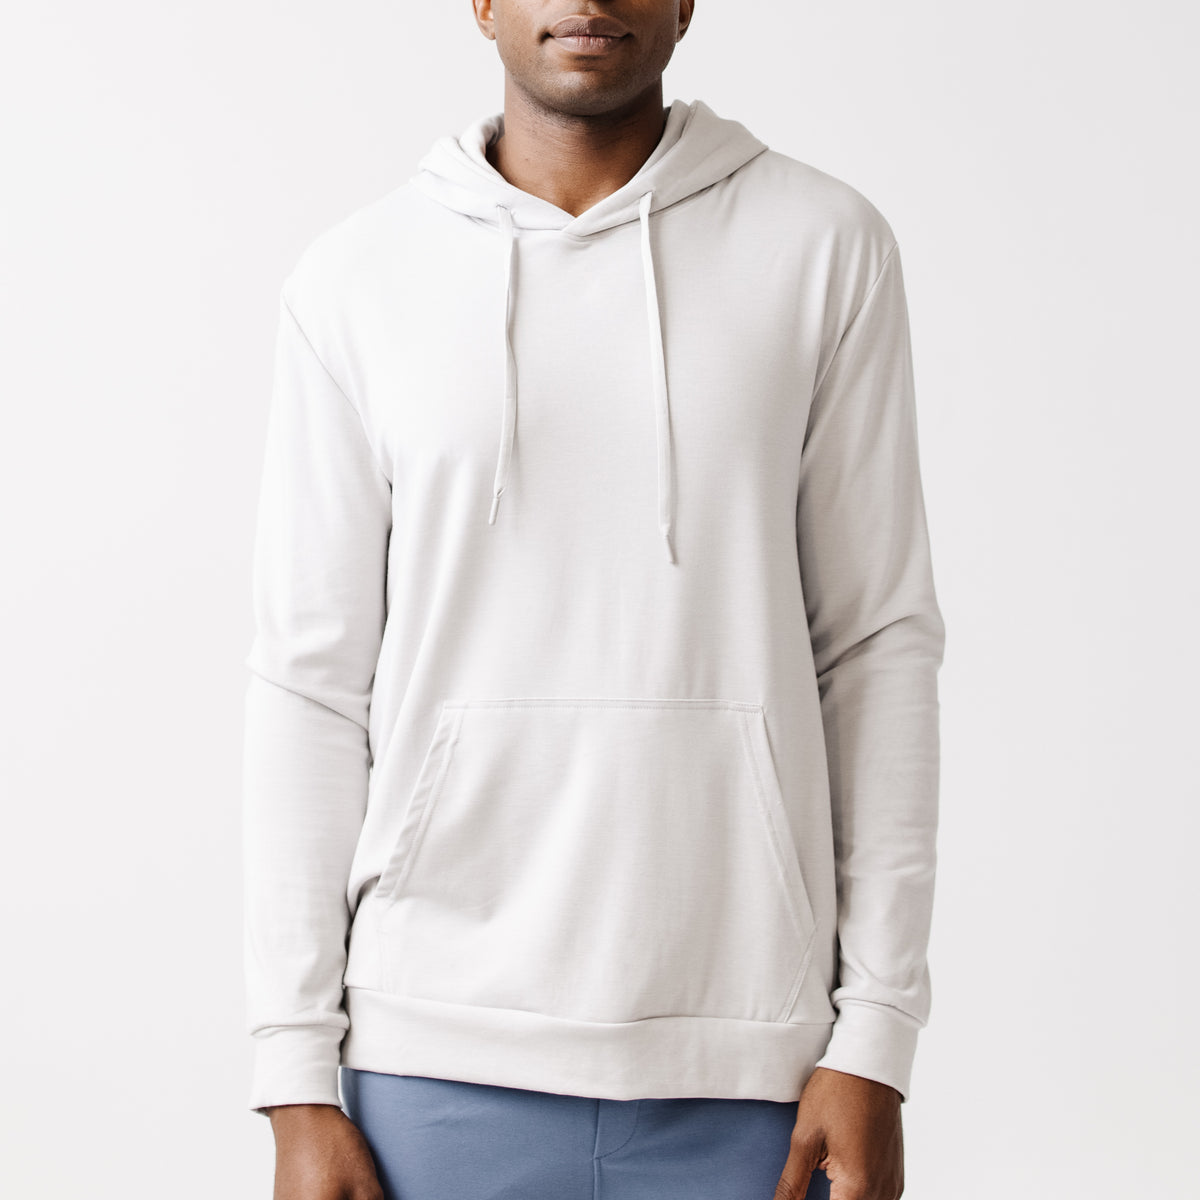 Chaps Men's Everyday Fleece Logo Pullover Hoodie- Sizes XS up to